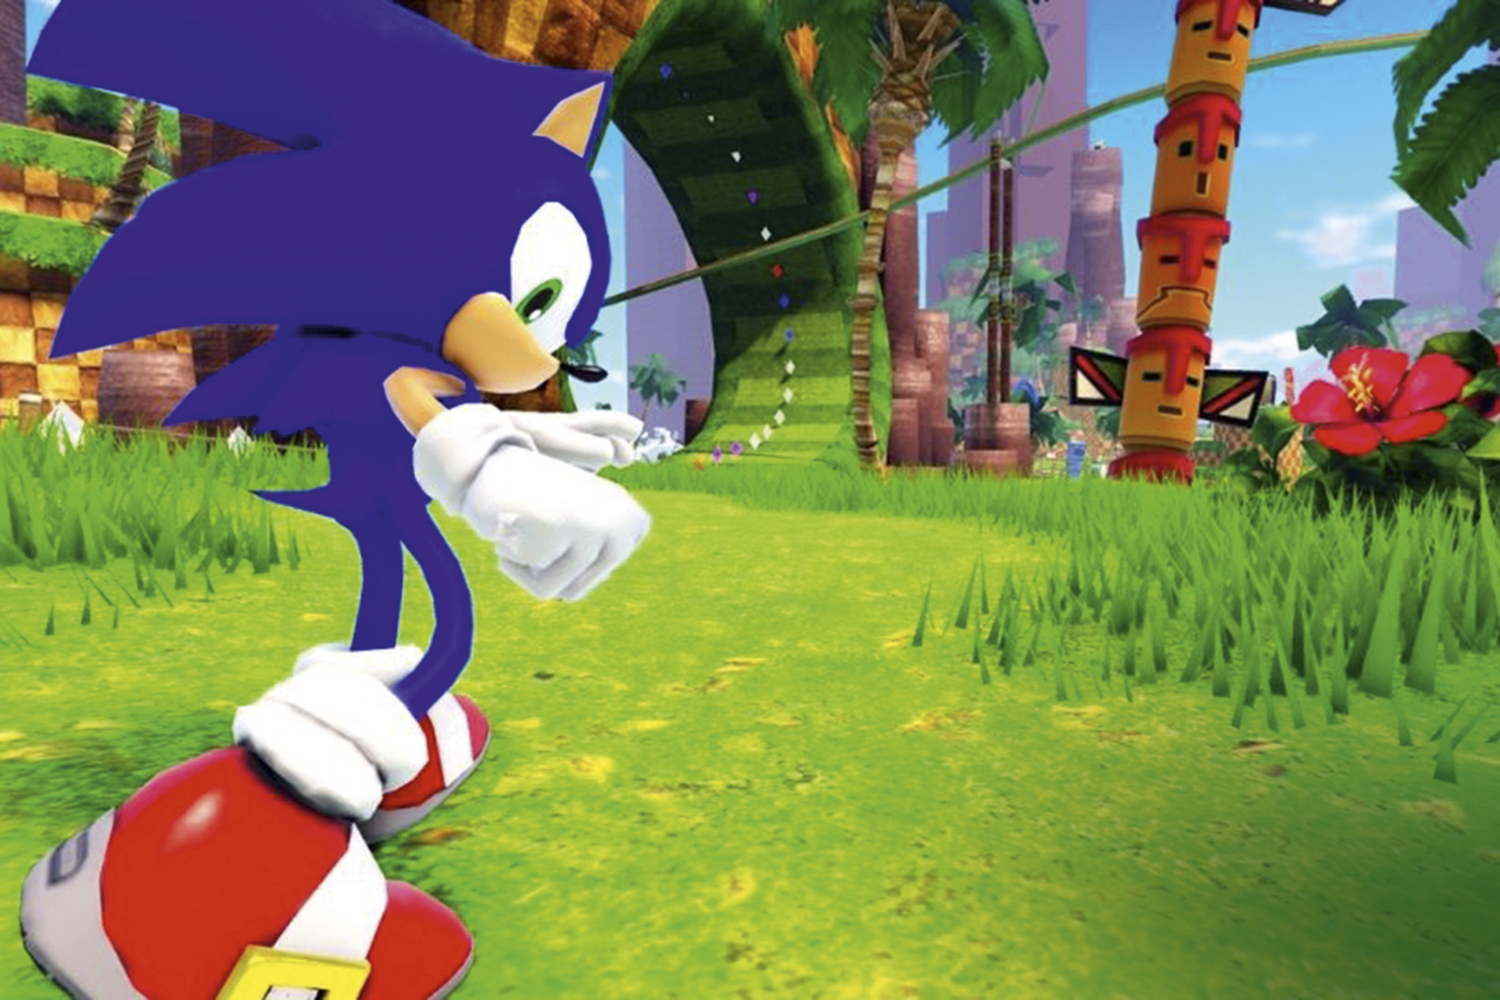 ONE HEDGEHOG - Sonic in action: the Sega character returns in new packaging -